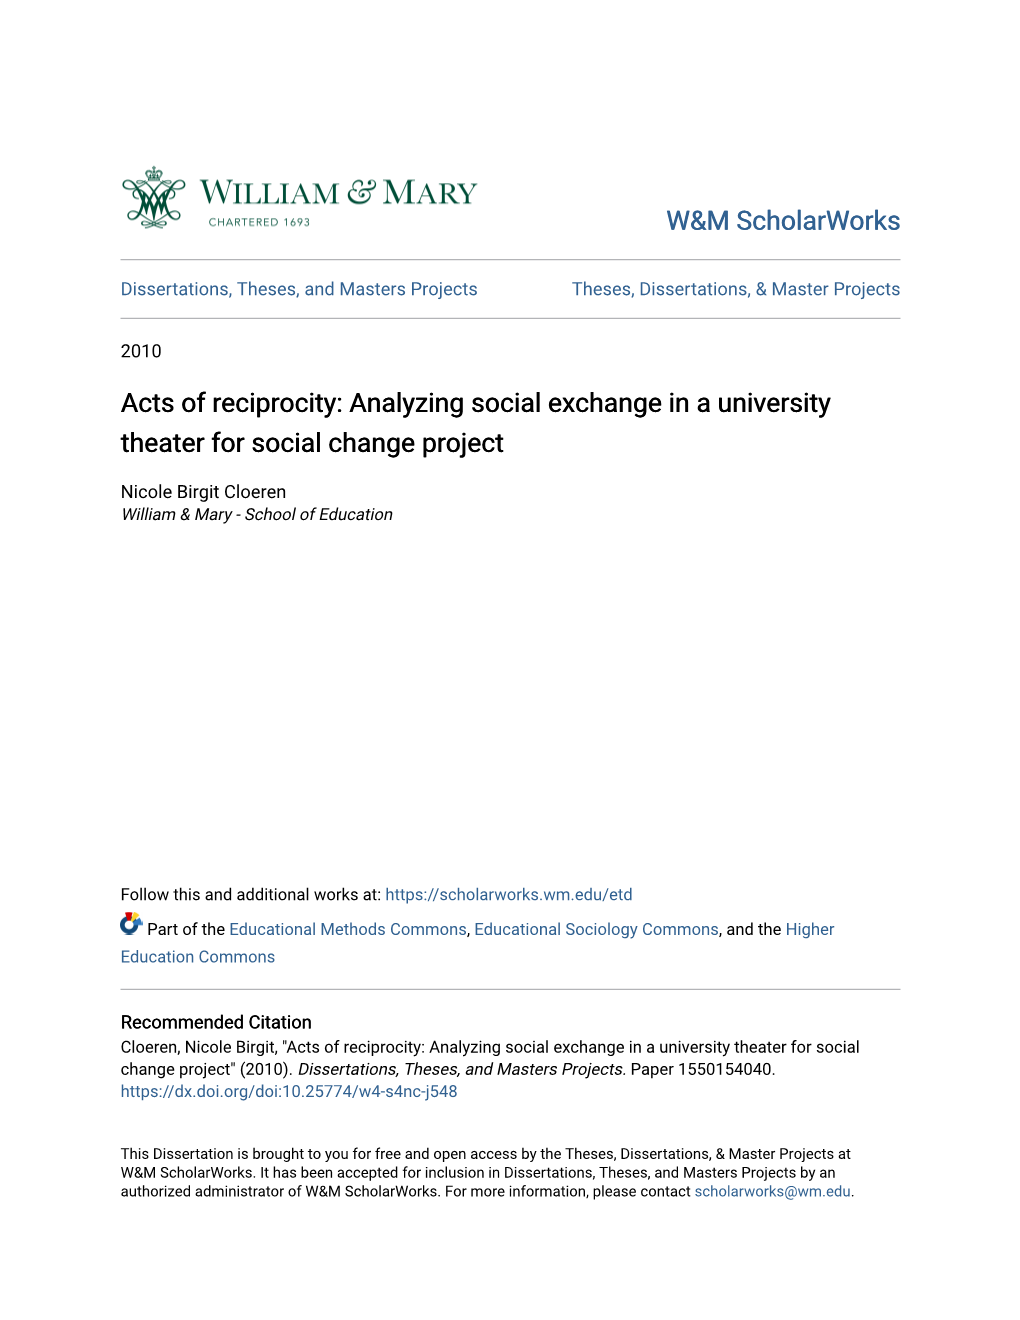 Acts of Reciprocity: Analyzing Social Exchange in a University Theater for Social Change Project